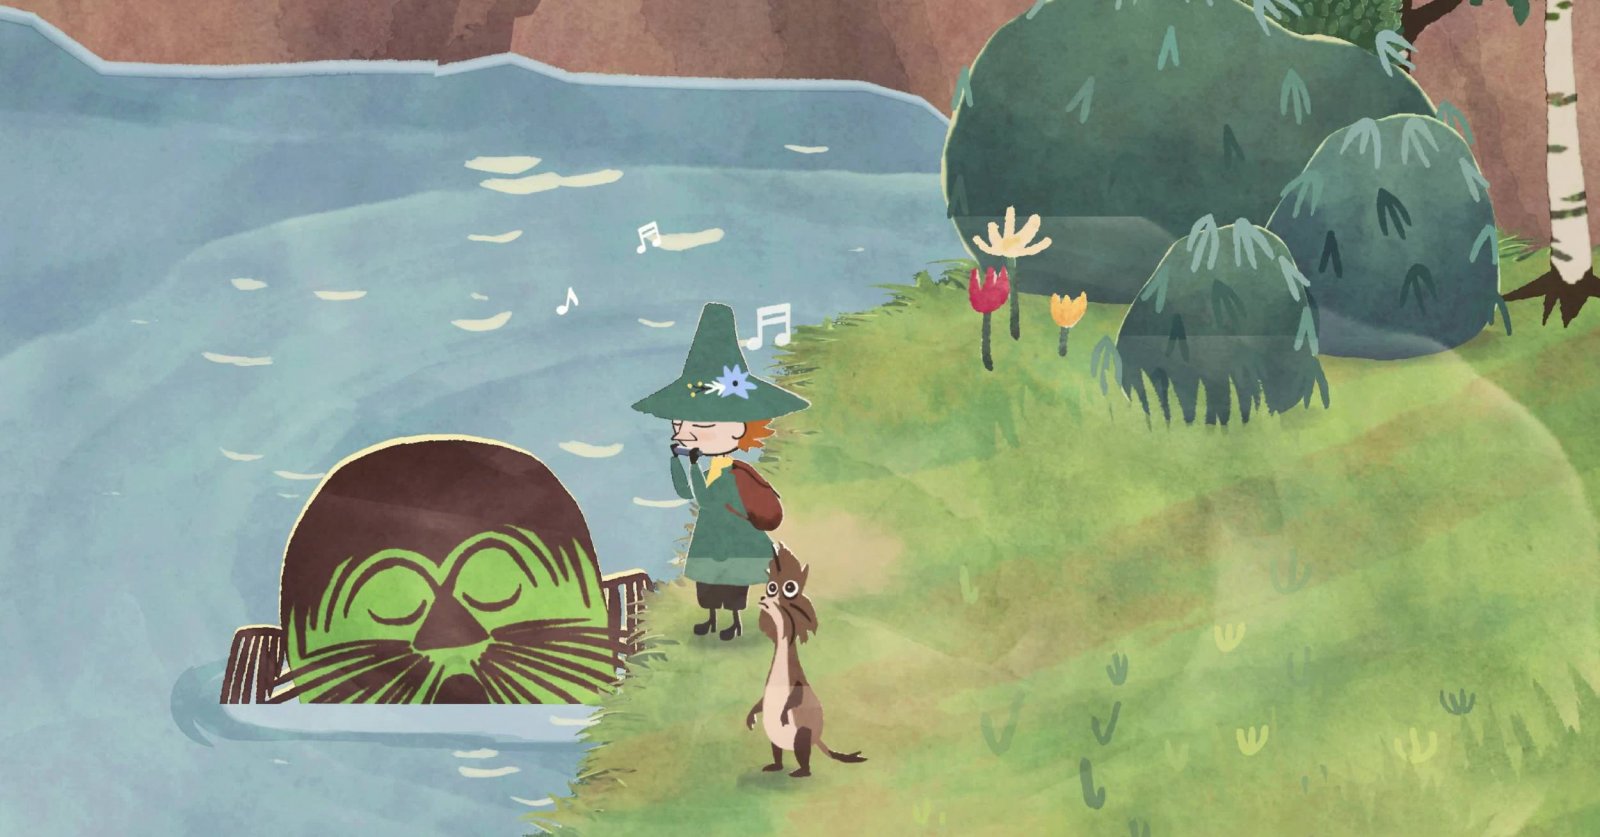 Snufkin Melody of Moominvalley game features music from Sigur Rós